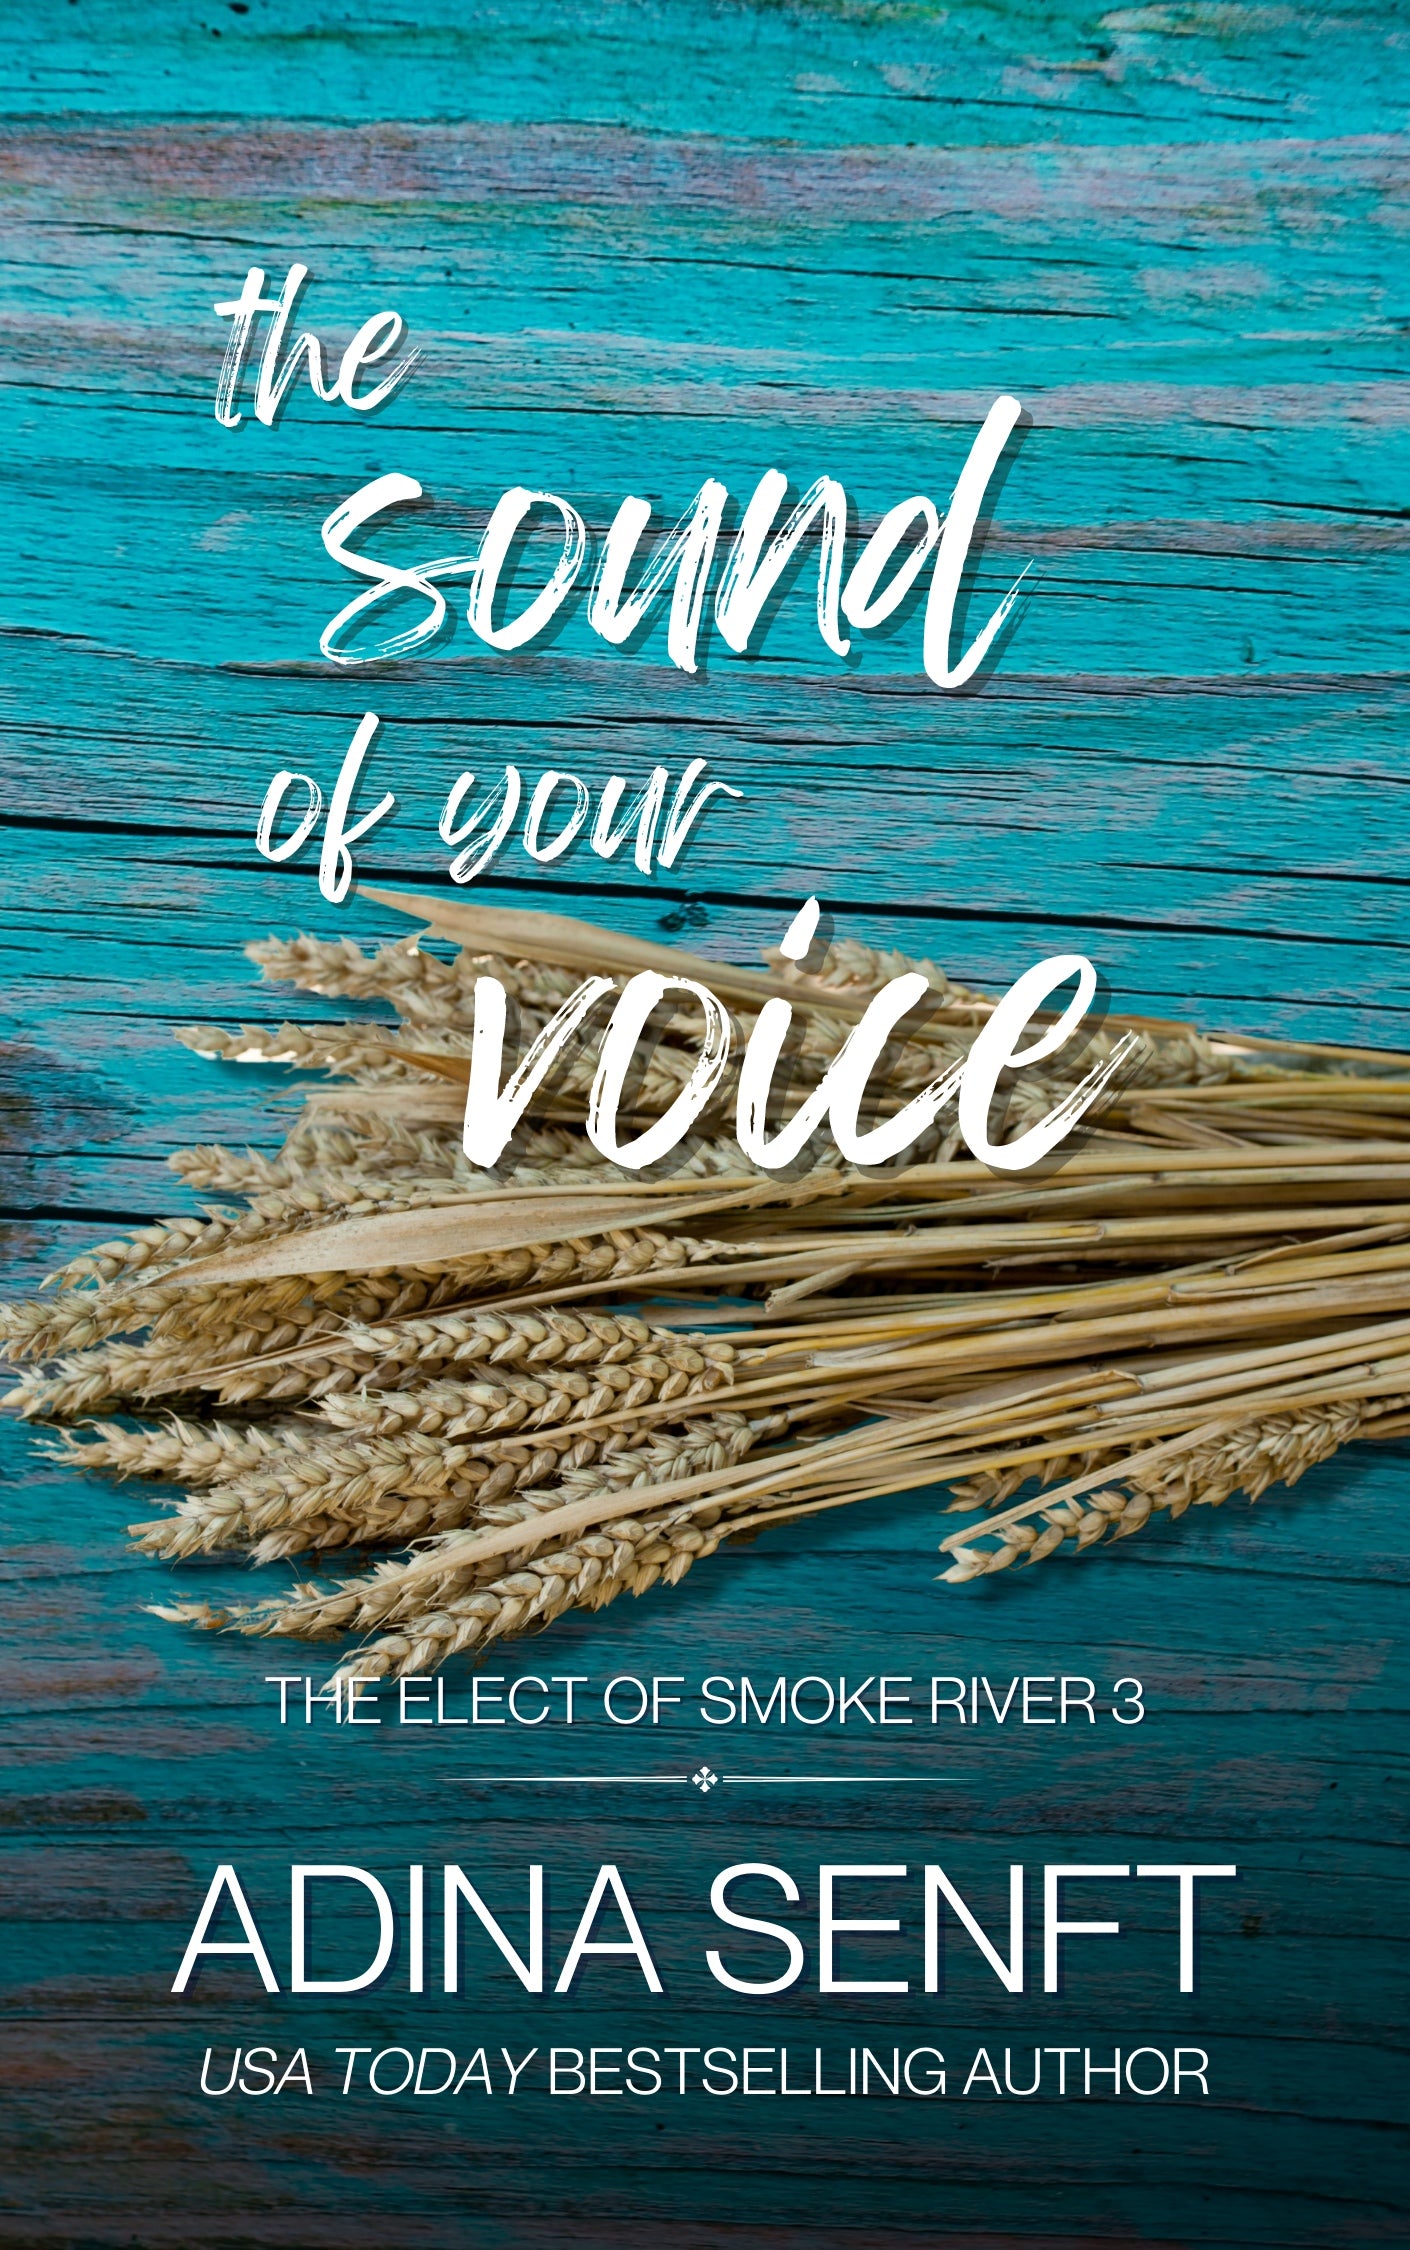 The Sound of Your Voice: The Elect of Smoke River 3 by Adina Senft